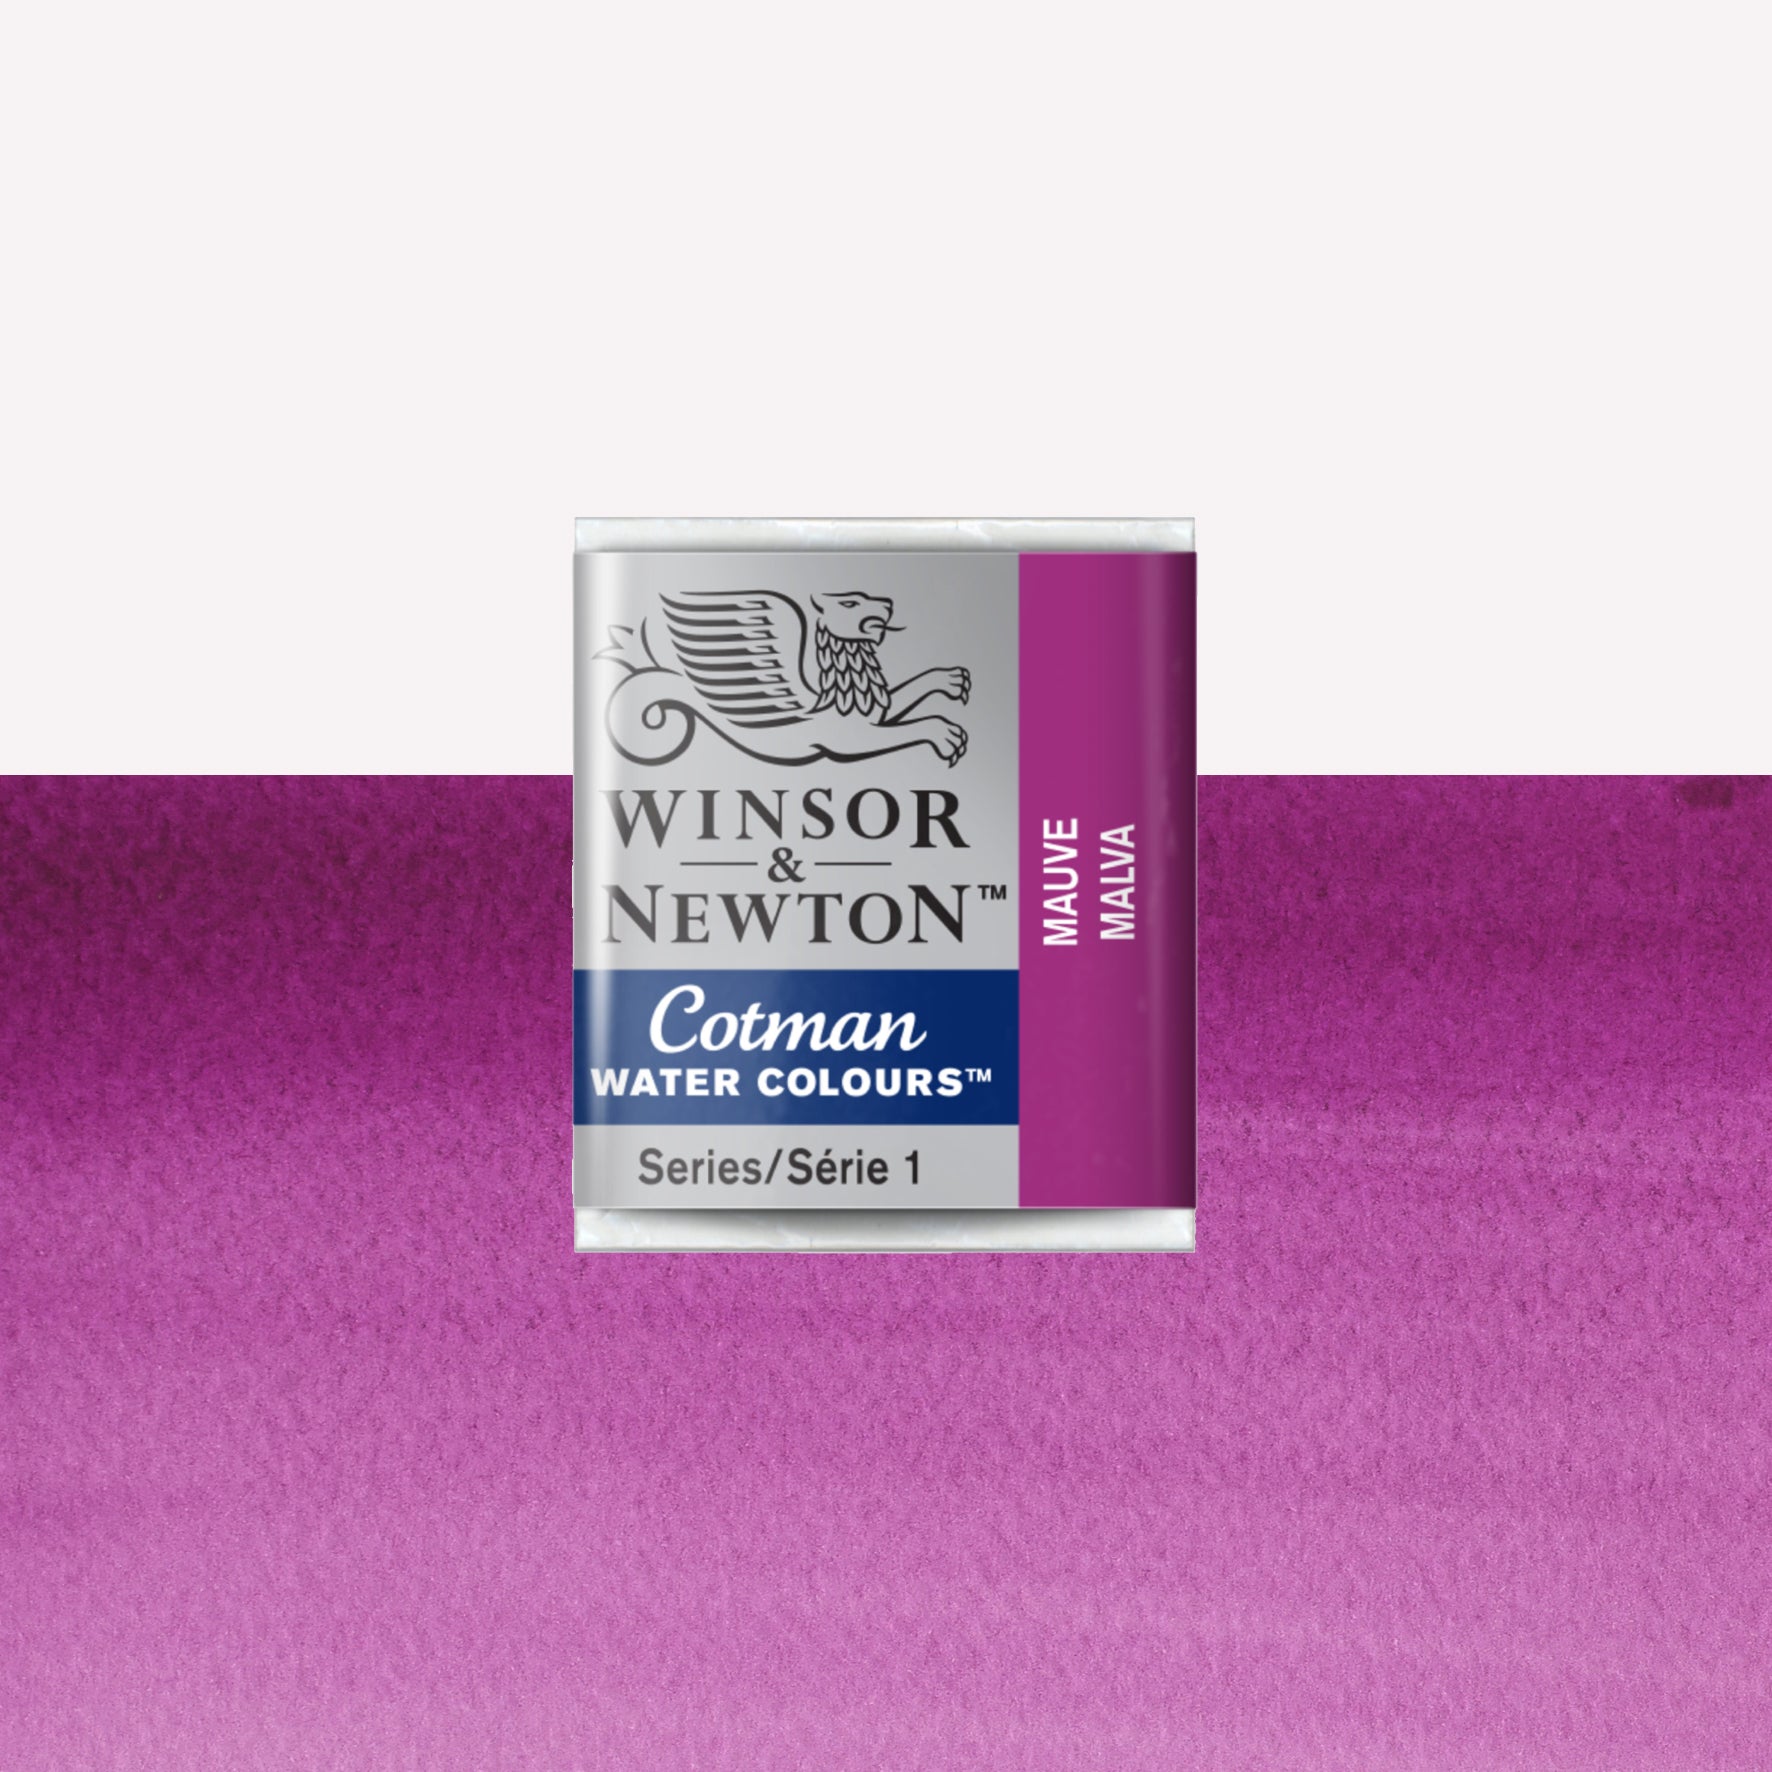 Winsor & Newton Cotman watercolour half pan in the shade Mauve over a vibrant colour swatch. These half pans have a solid formula and are packaged in compressed paint cake. 